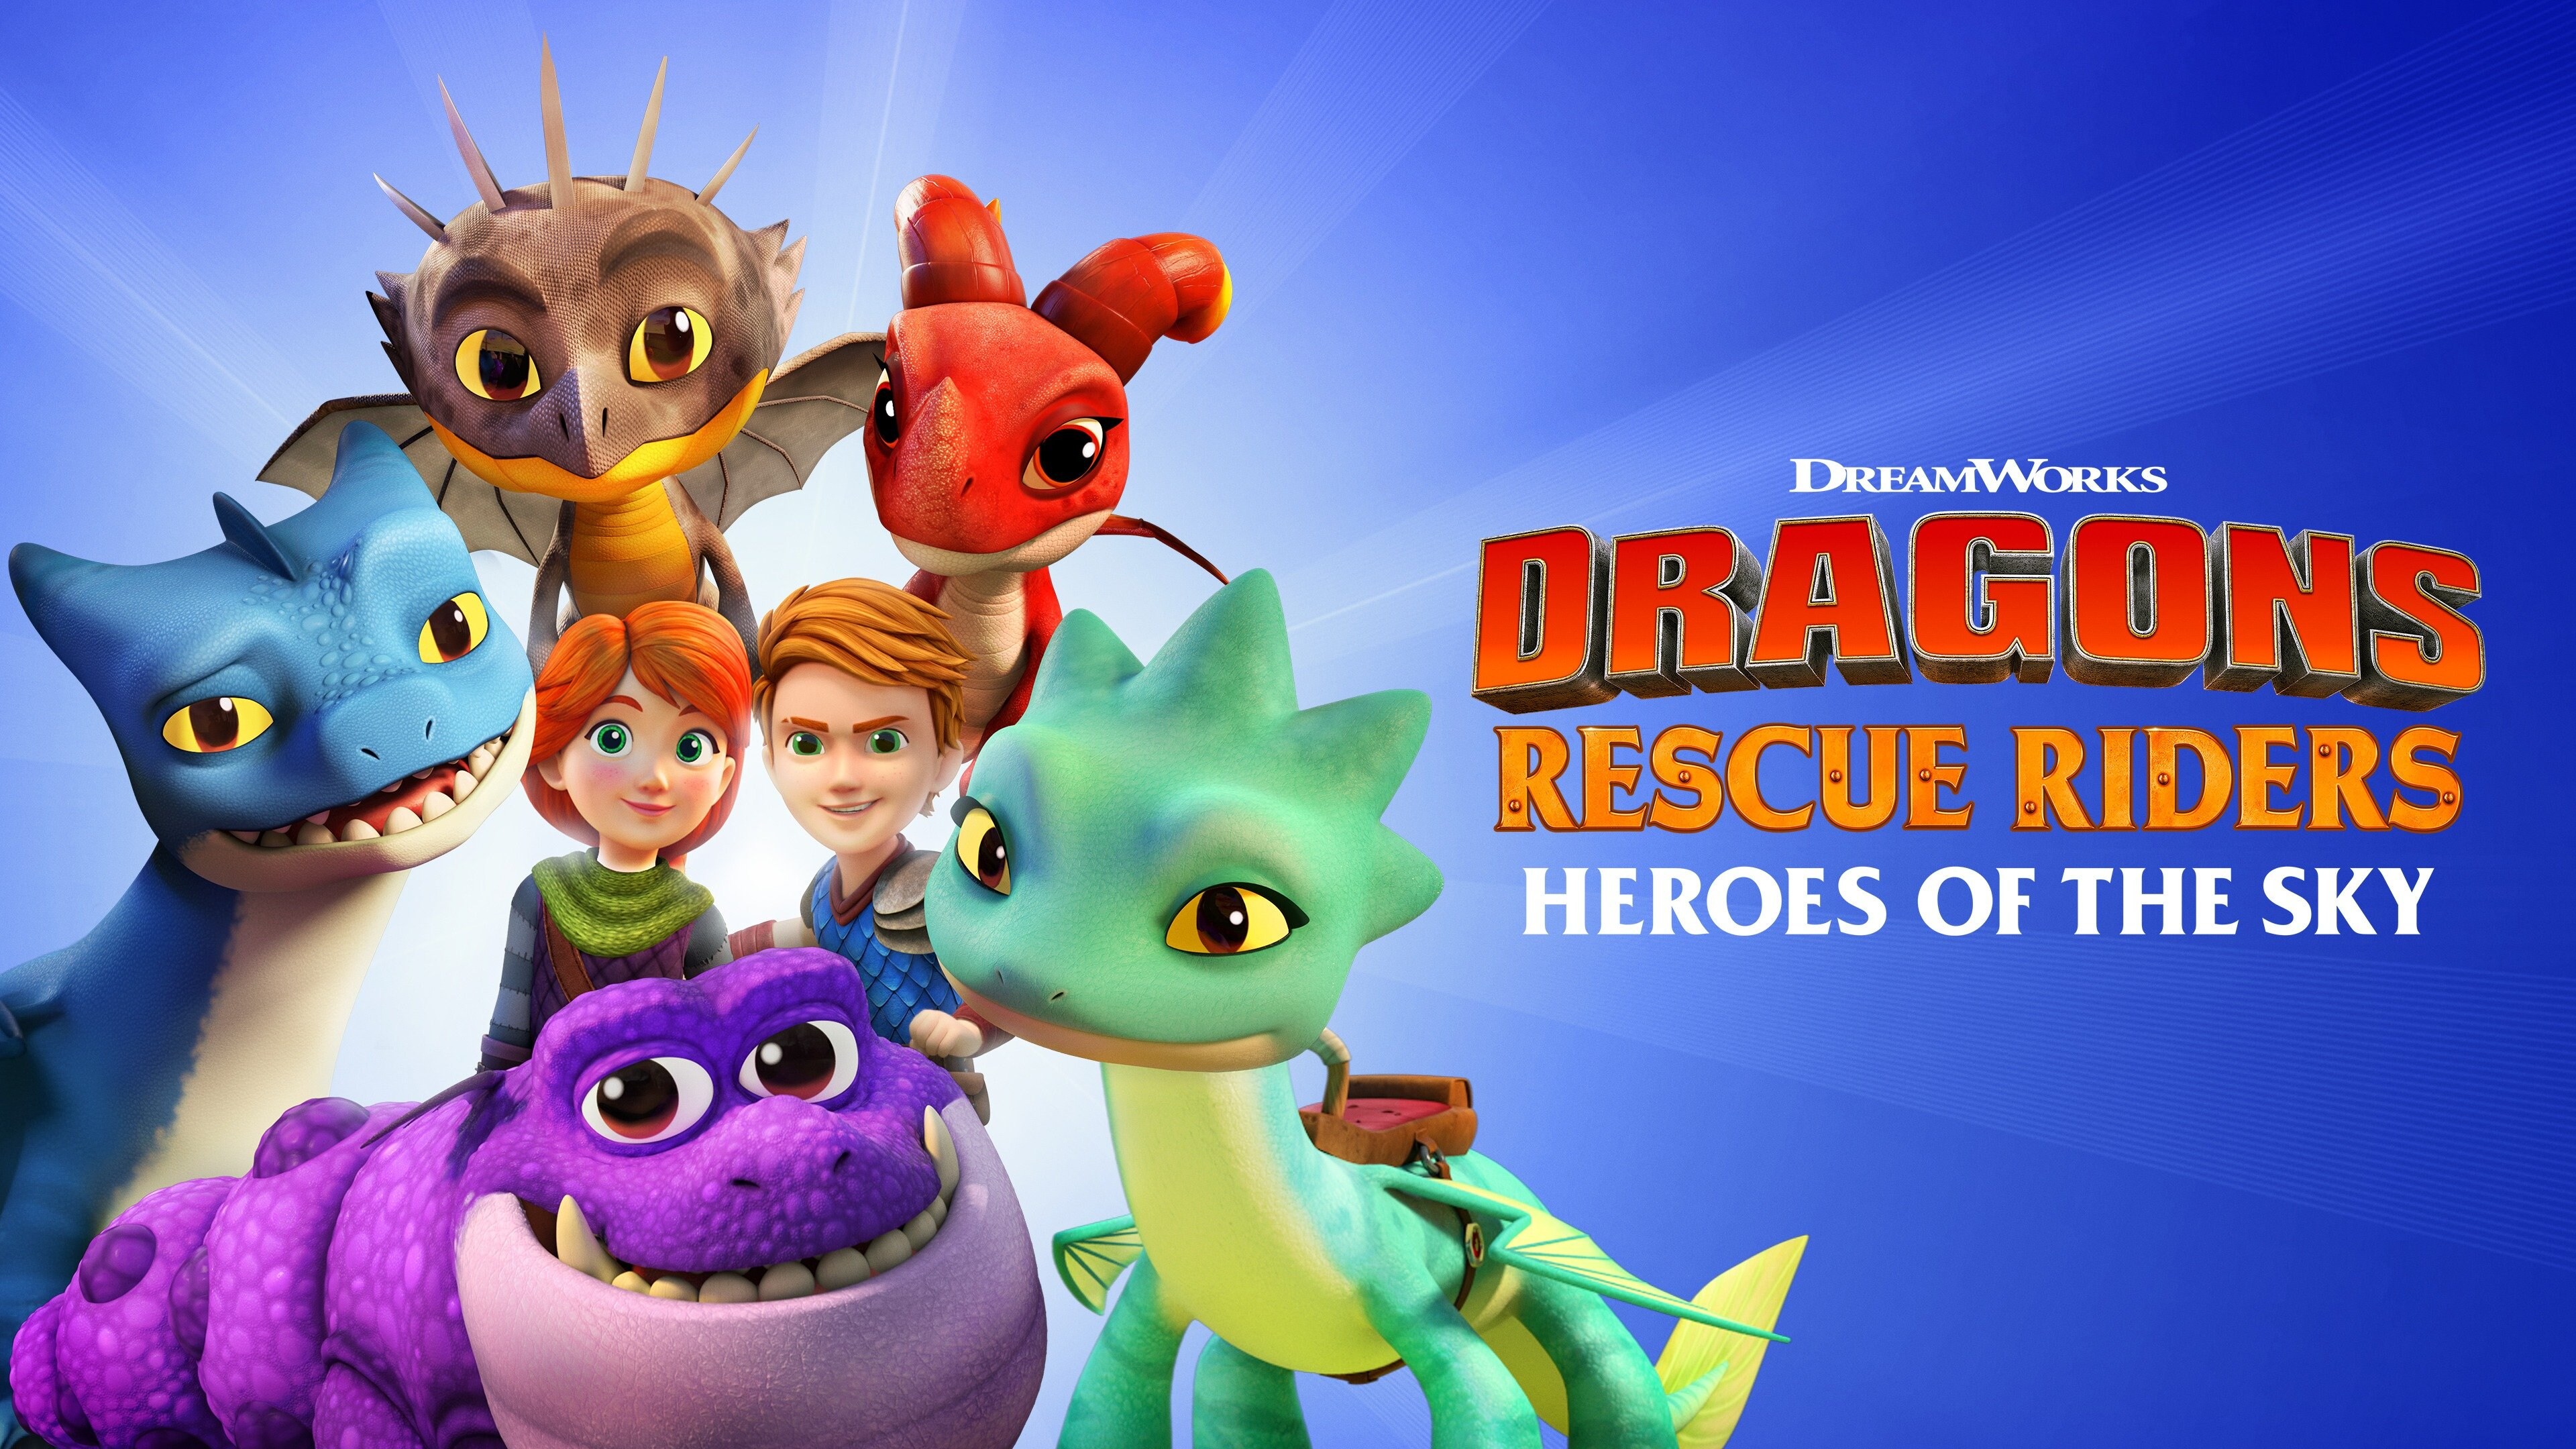 Watch dragons rescue riders heroes of the sky season streaming online peacock